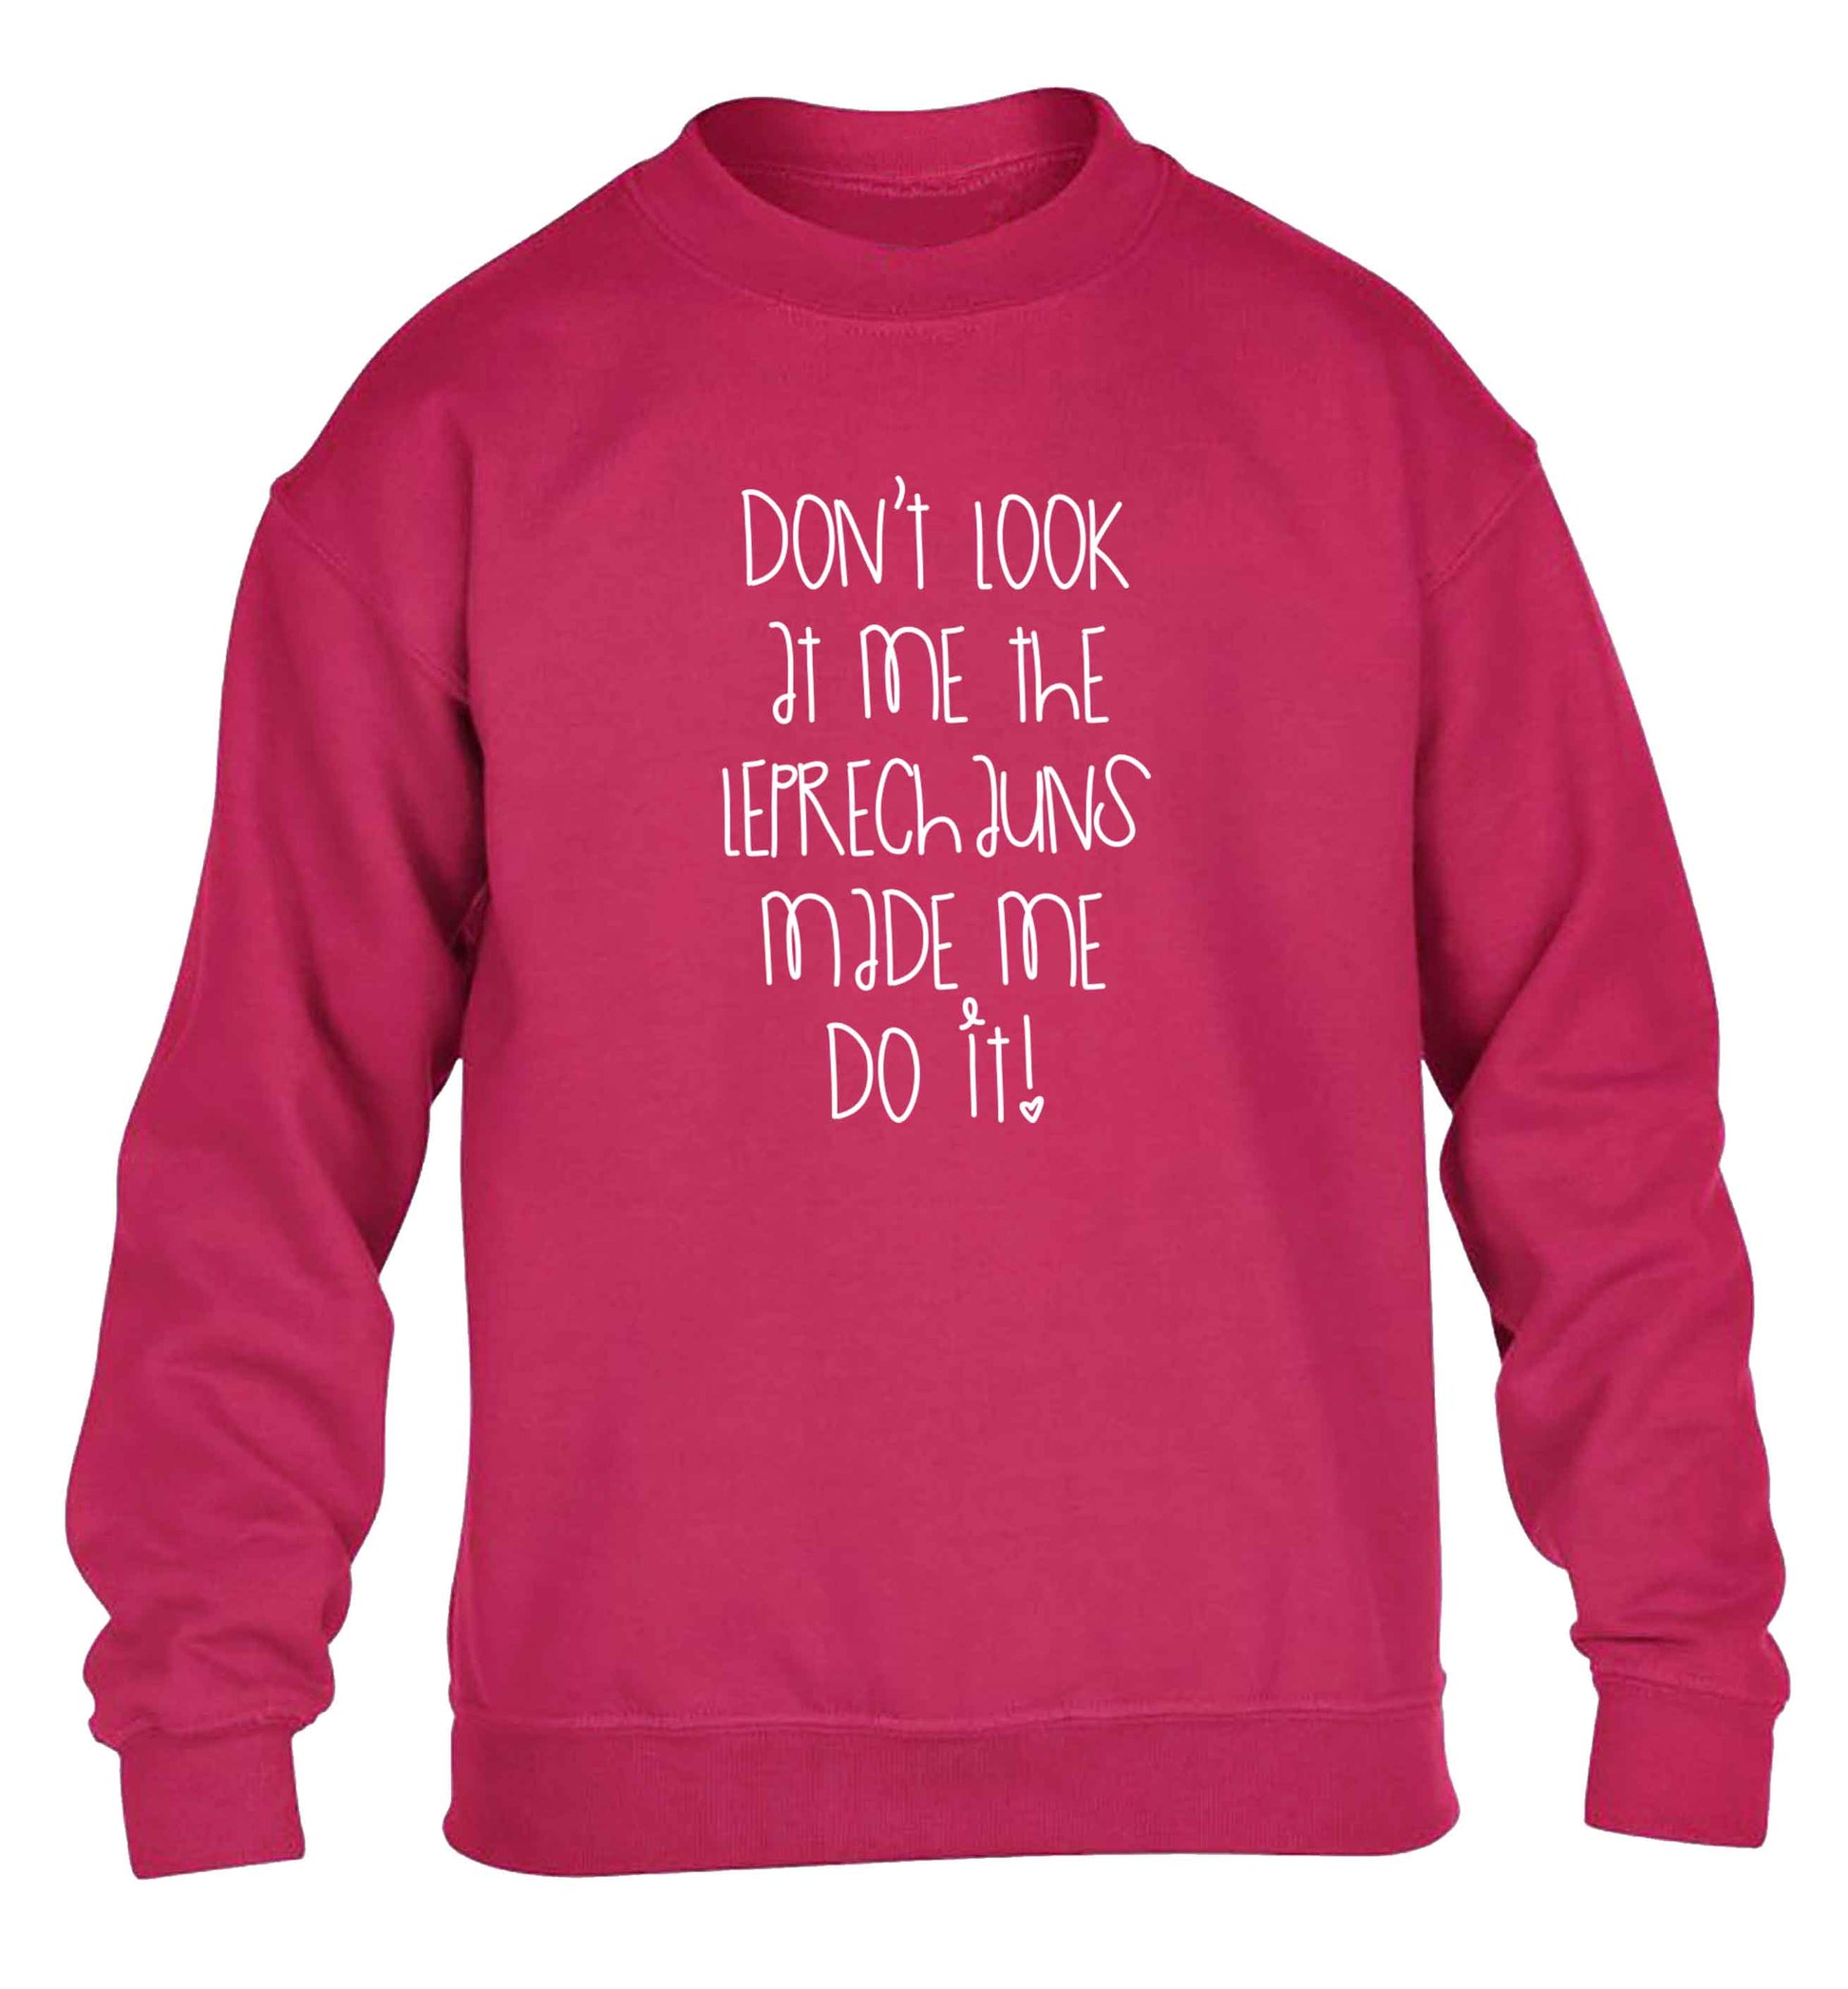 Don't look at me the leprechauns made me do it children's pink sweater 12-13 Years